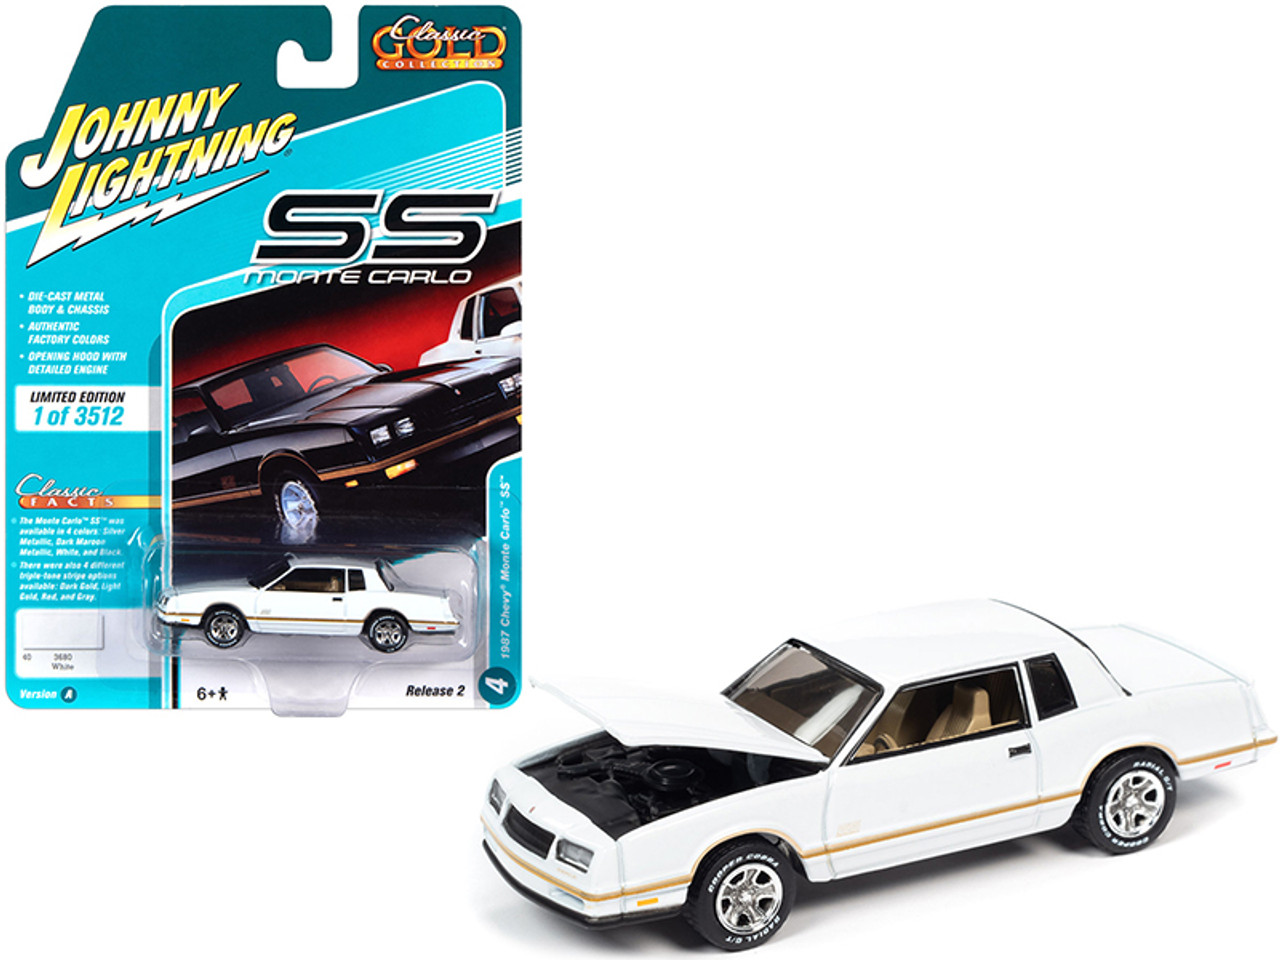 1987 Chevrolet Monte Carlo SS White with Gold Stripes "Classic Gold Collection" Limited Edition to 3512 pieces Worldwide 1/64 Diecast Model Car by Johnny Lightning